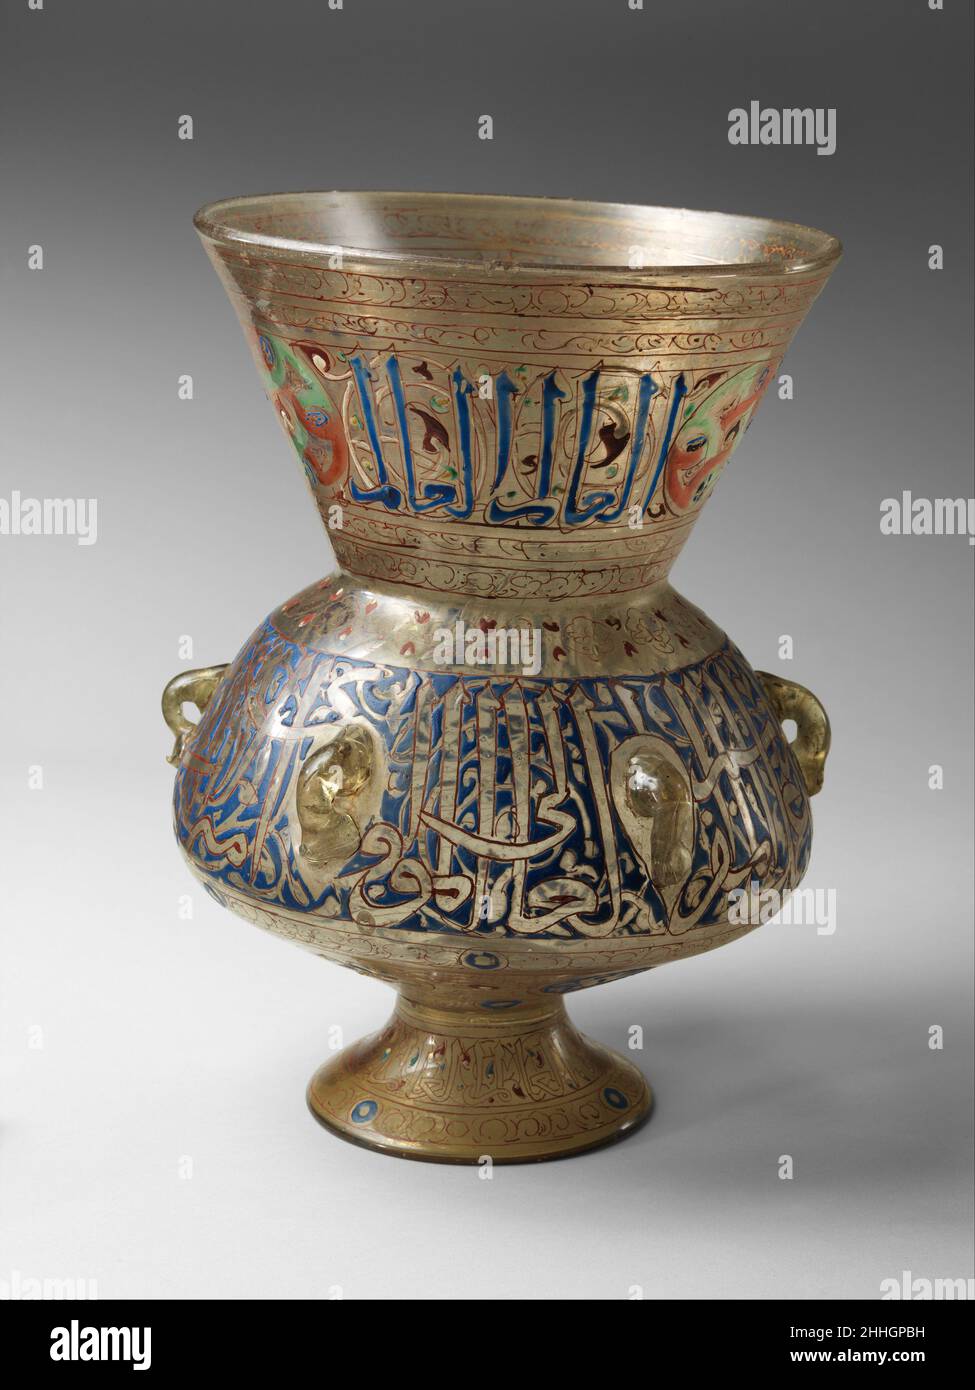 Mosque Lamp 14th century One of the conventions of Mamluk mosque lamp decoration was to execute one inscription band in blue and the other in reserve against a blue ground. On this lamp, the neck and foot repeat the phrase al?'alim ('The Wise'), punctuated by an as yet unassigned emblem, while the body bears a formulaic dedicatory inscription but no name.. Mosque Lamp. 14th century. Glass, colorless with yellow tinge; blown, applied blown foot, enameled and gilded. Attributed to Egypt or Syria. Glass Stock Photo